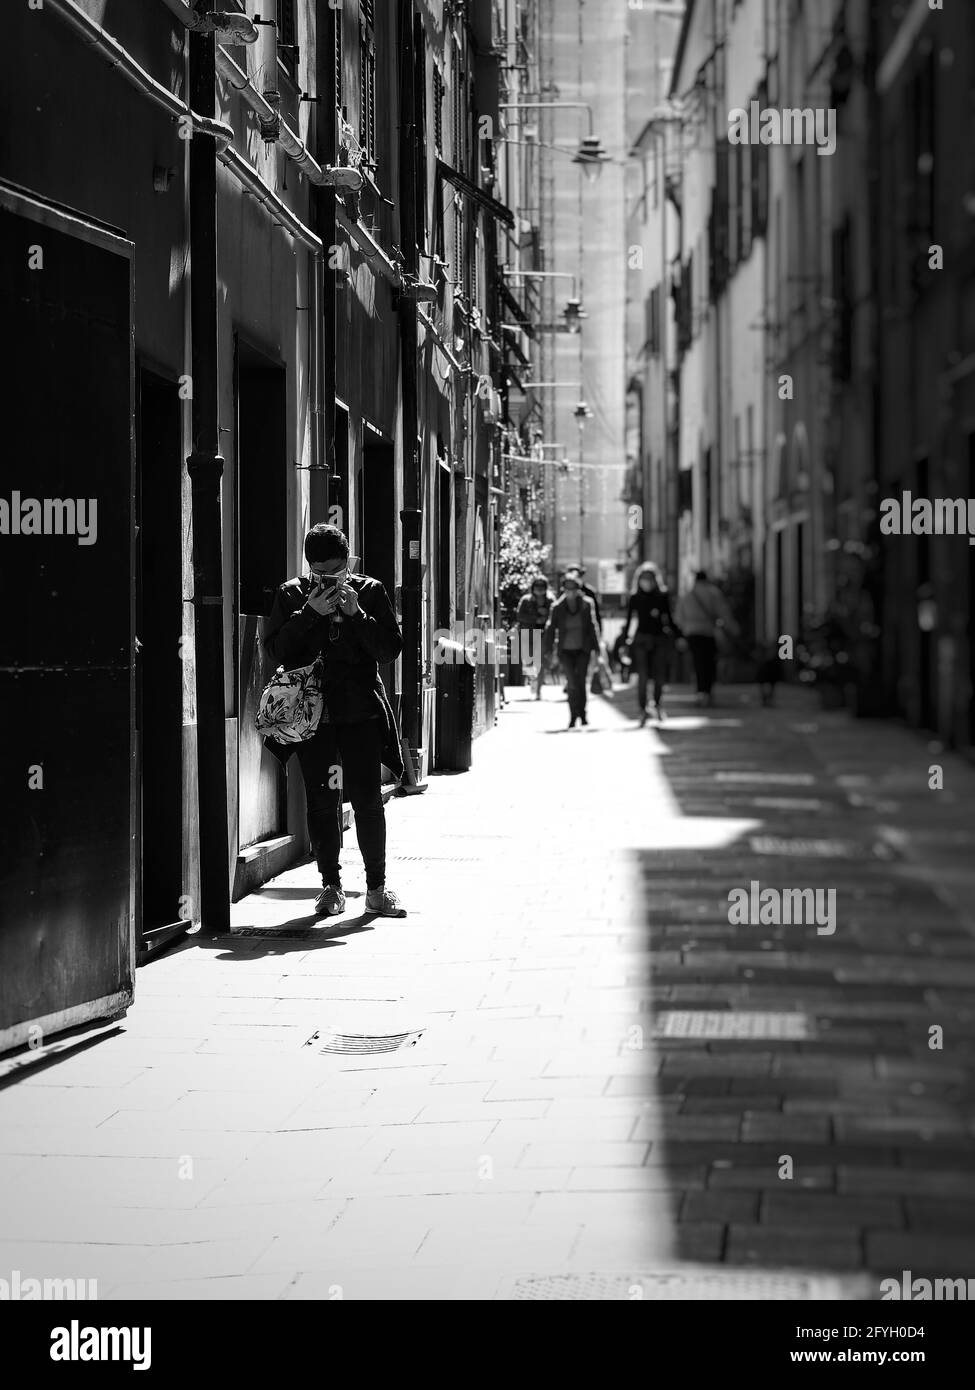 GENOA, ITALY - Apr 17, 2021: a day in the city center, trying to tell and capture a story Stock Photo